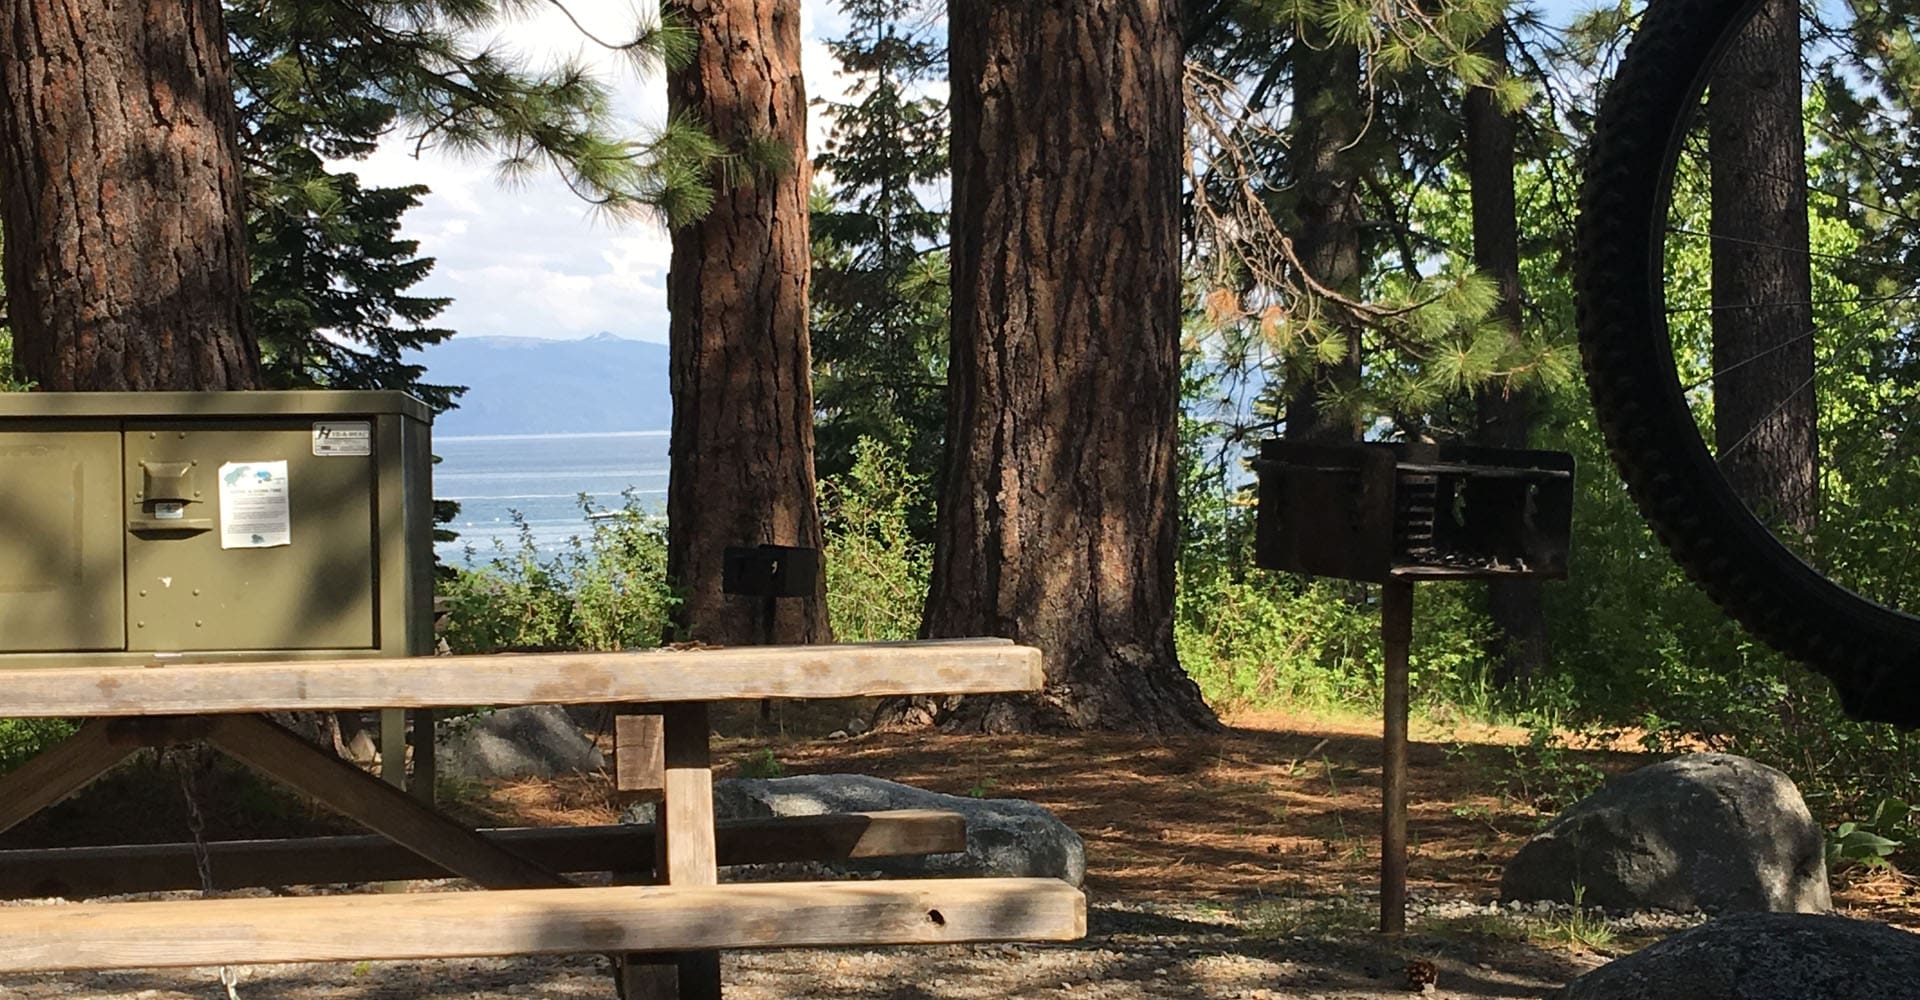 Tahoe State Recreation Area Campground